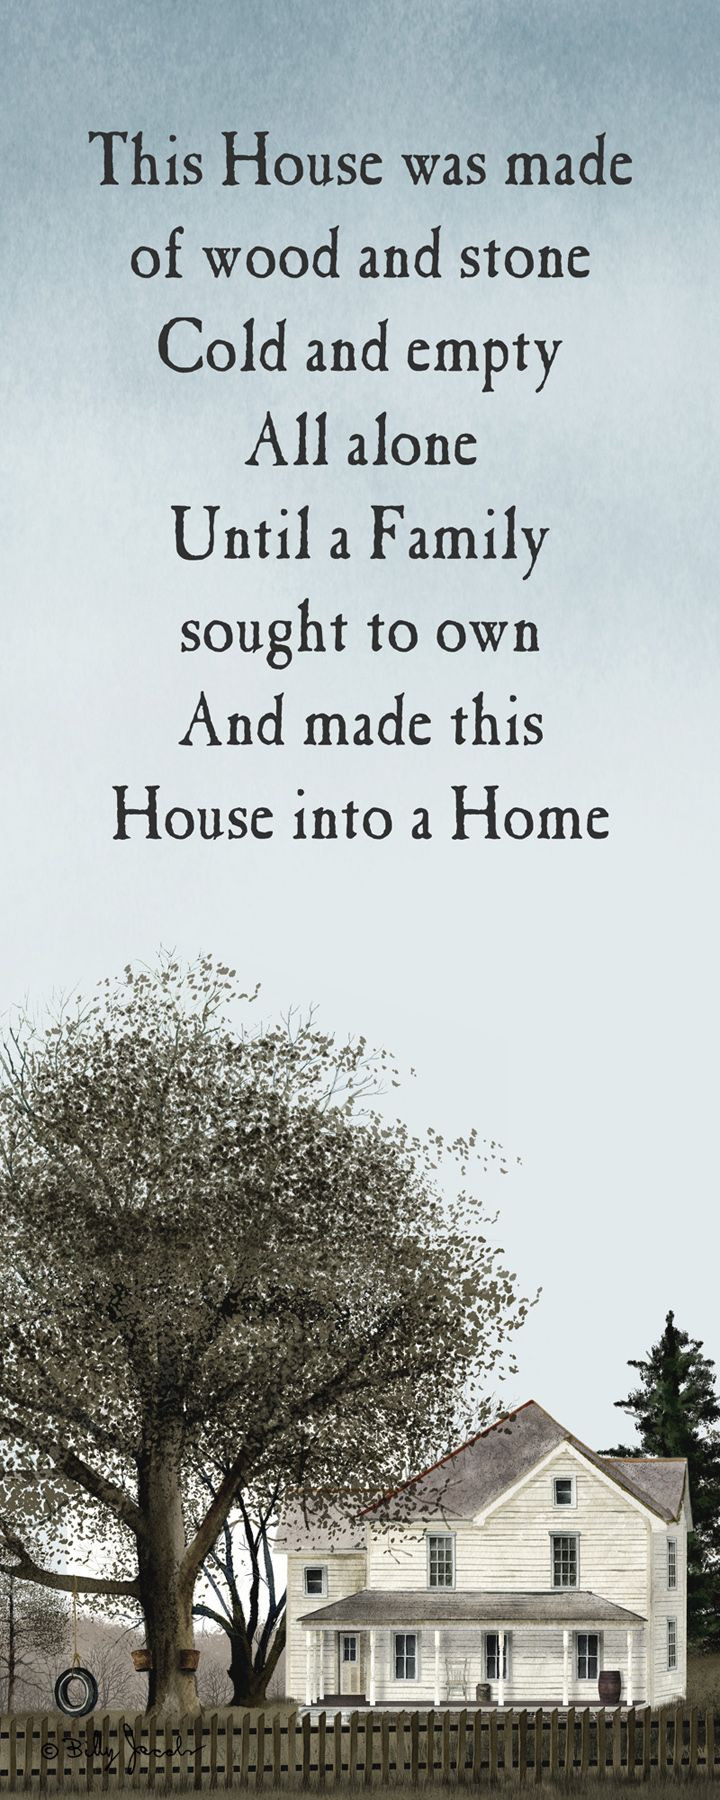 Quotes About Homes And Family
 Quote "This house was made of wood and stone Cold and